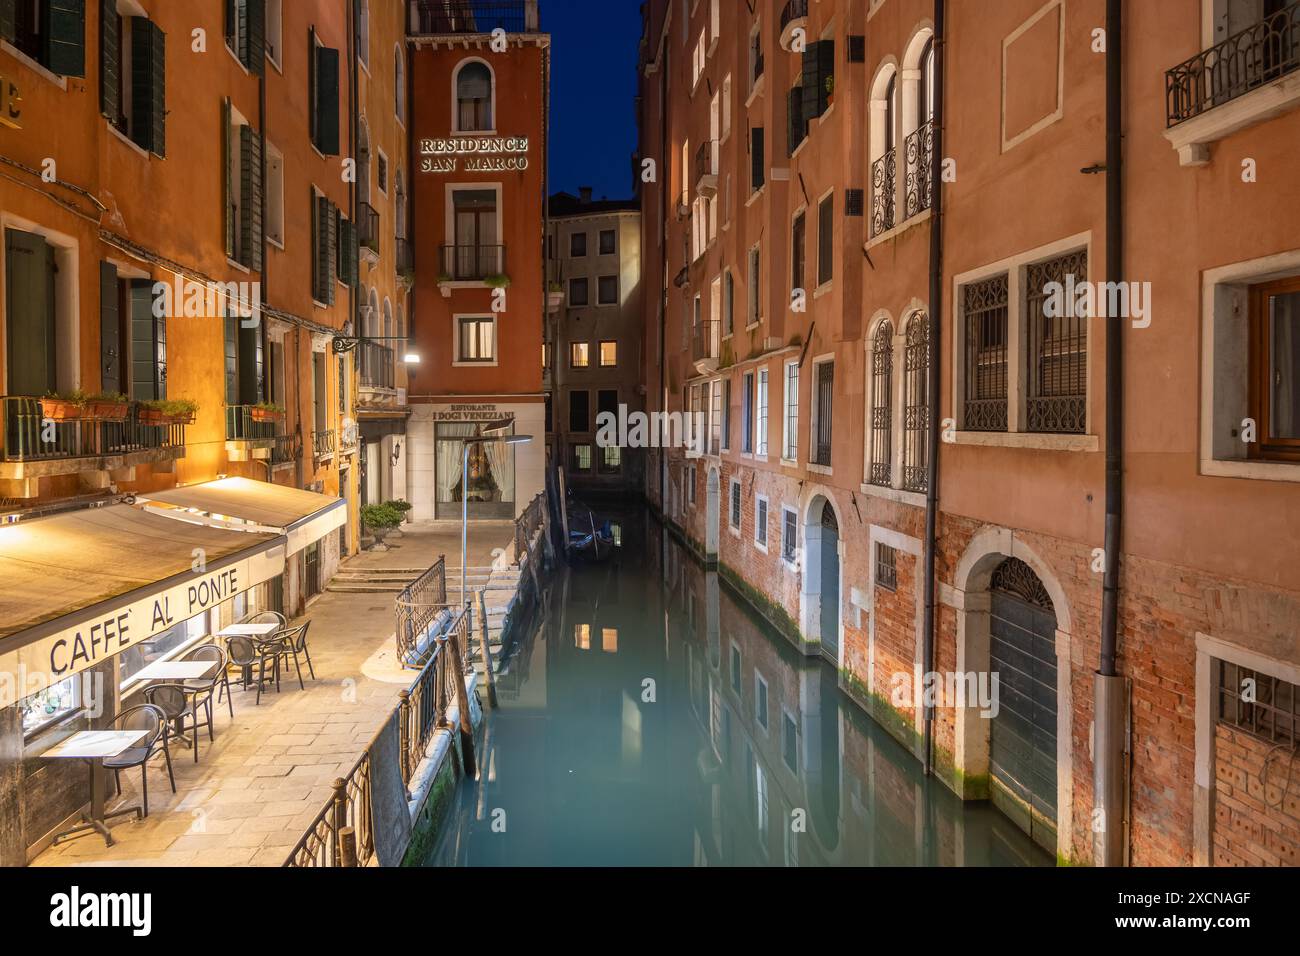 Venice city by night in Italy, canal in San Marco district with Caffe al Ponte and Ristorante Ai Dogi Veneziani restaurant, view from Ponte dei Dai br Stock Photo